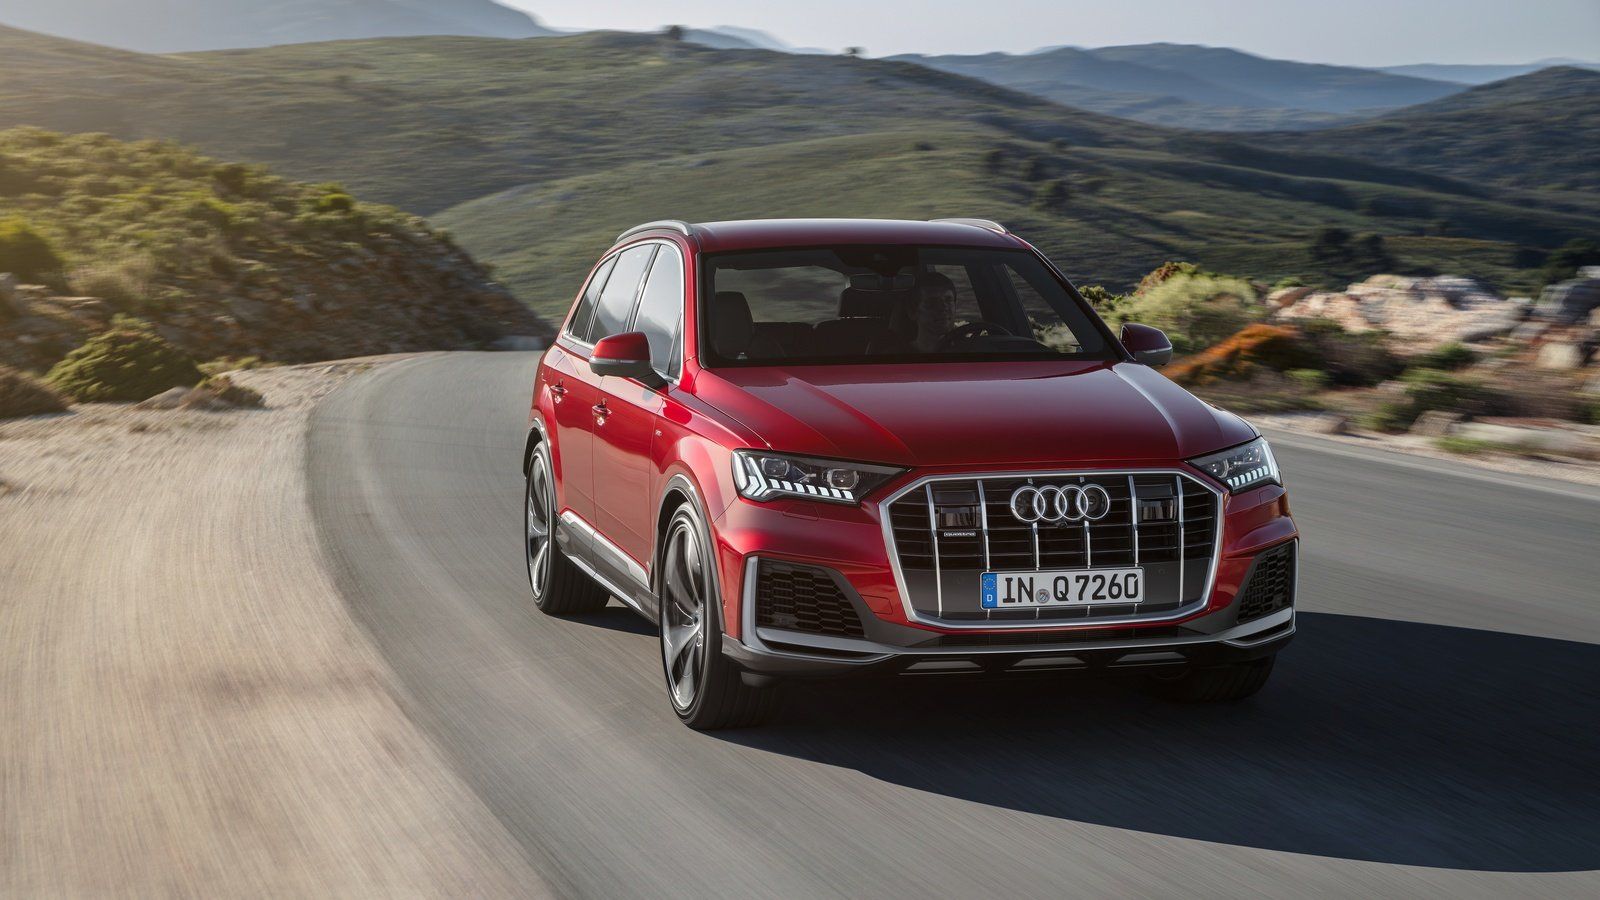 The 2020 Audi Q7 Has An Updated Design And New Tech, But Does It